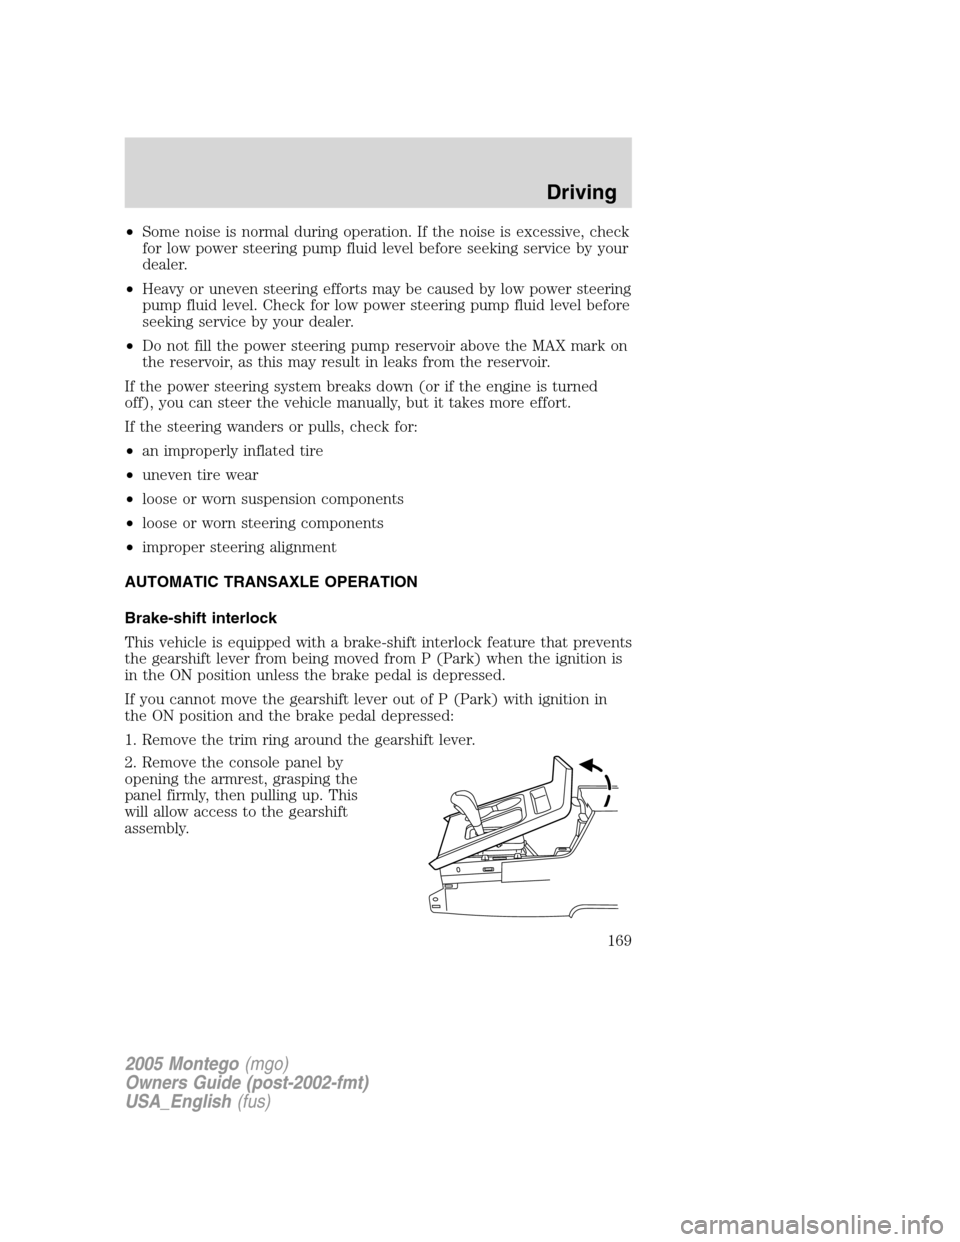 Mercury Montego 2005  s User Guide •Some noise is normal during operation. If the noise is excessive, check
for low power steering pump fluid level before seeking service by your
dealer.
•Heavy or uneven steering efforts may be cau